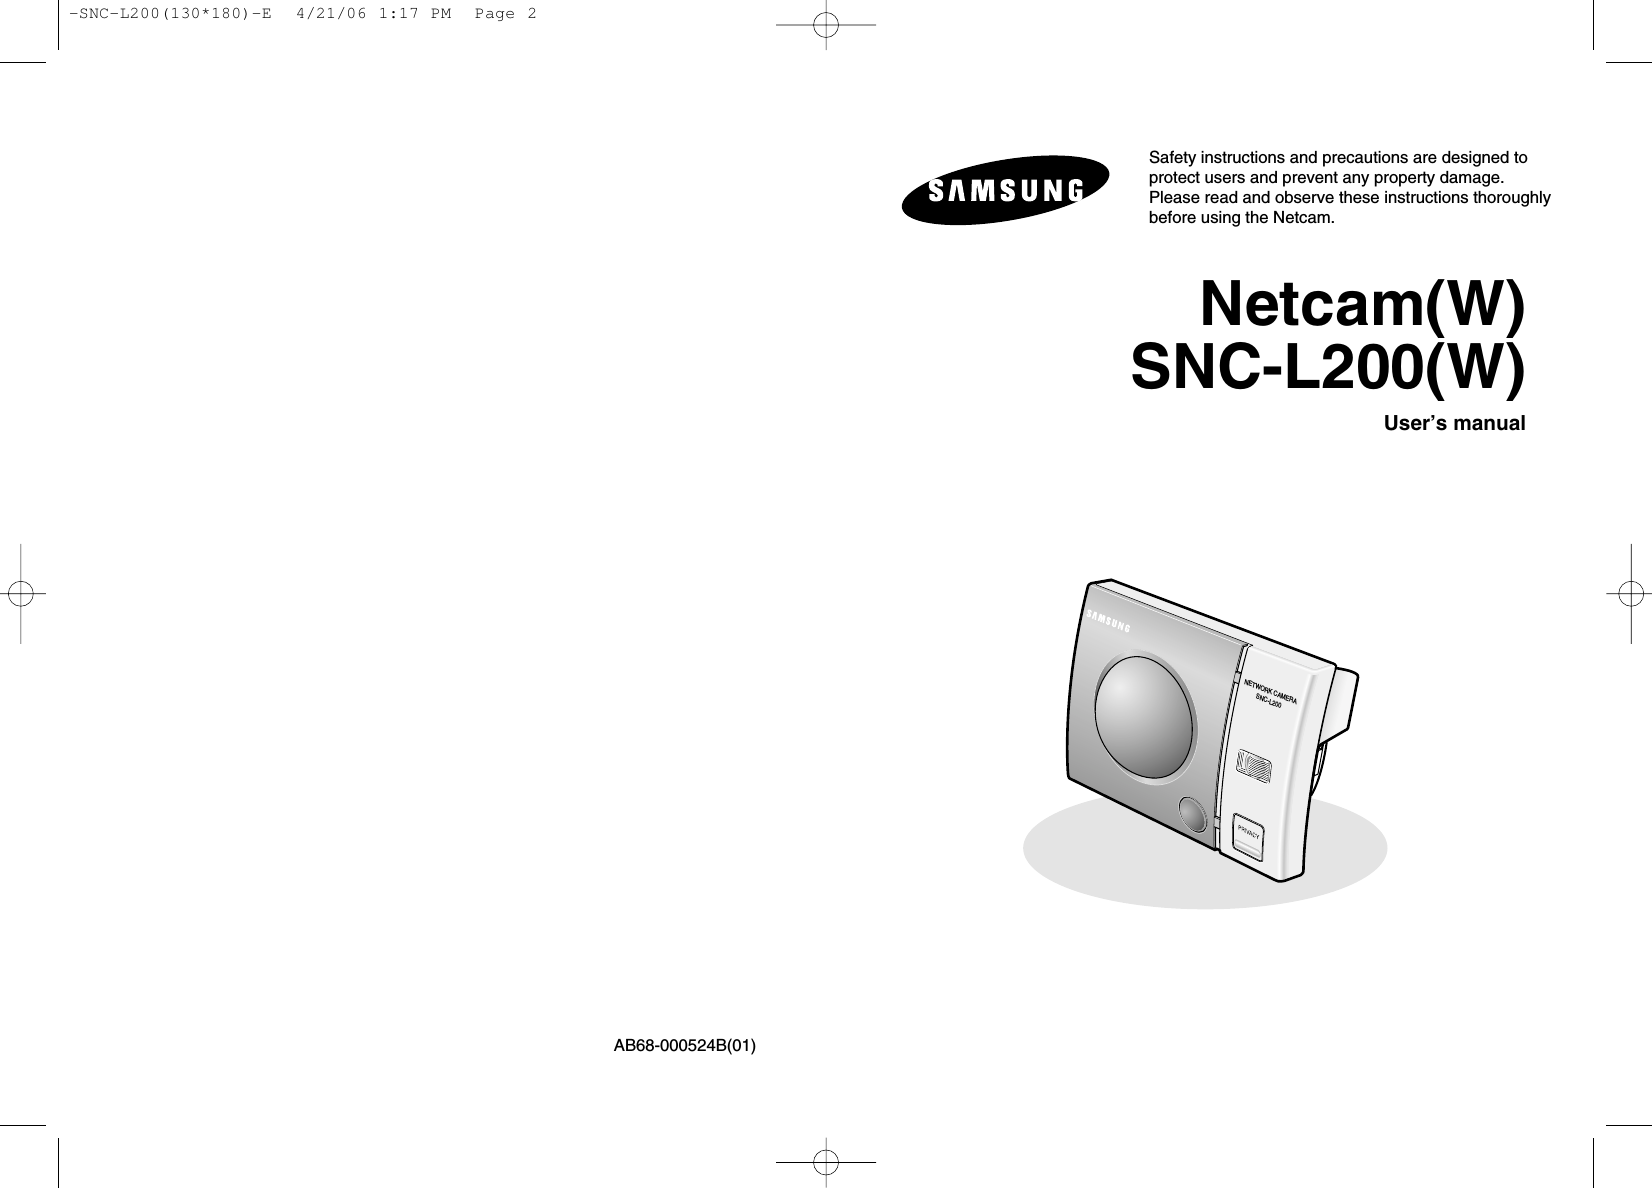 Netcam(W) SNC-L200(W)User’s manualSafety instructions and precautions are designed toprotect users and prevent any property damage.Please read and observe these instructions thoroughlybefore using the Netcam.NETWORK CAMERASNC-L200AB68-000524B(01)-SNC-L200(130*180)-E  4/21/06 1:17 PM  Page 2